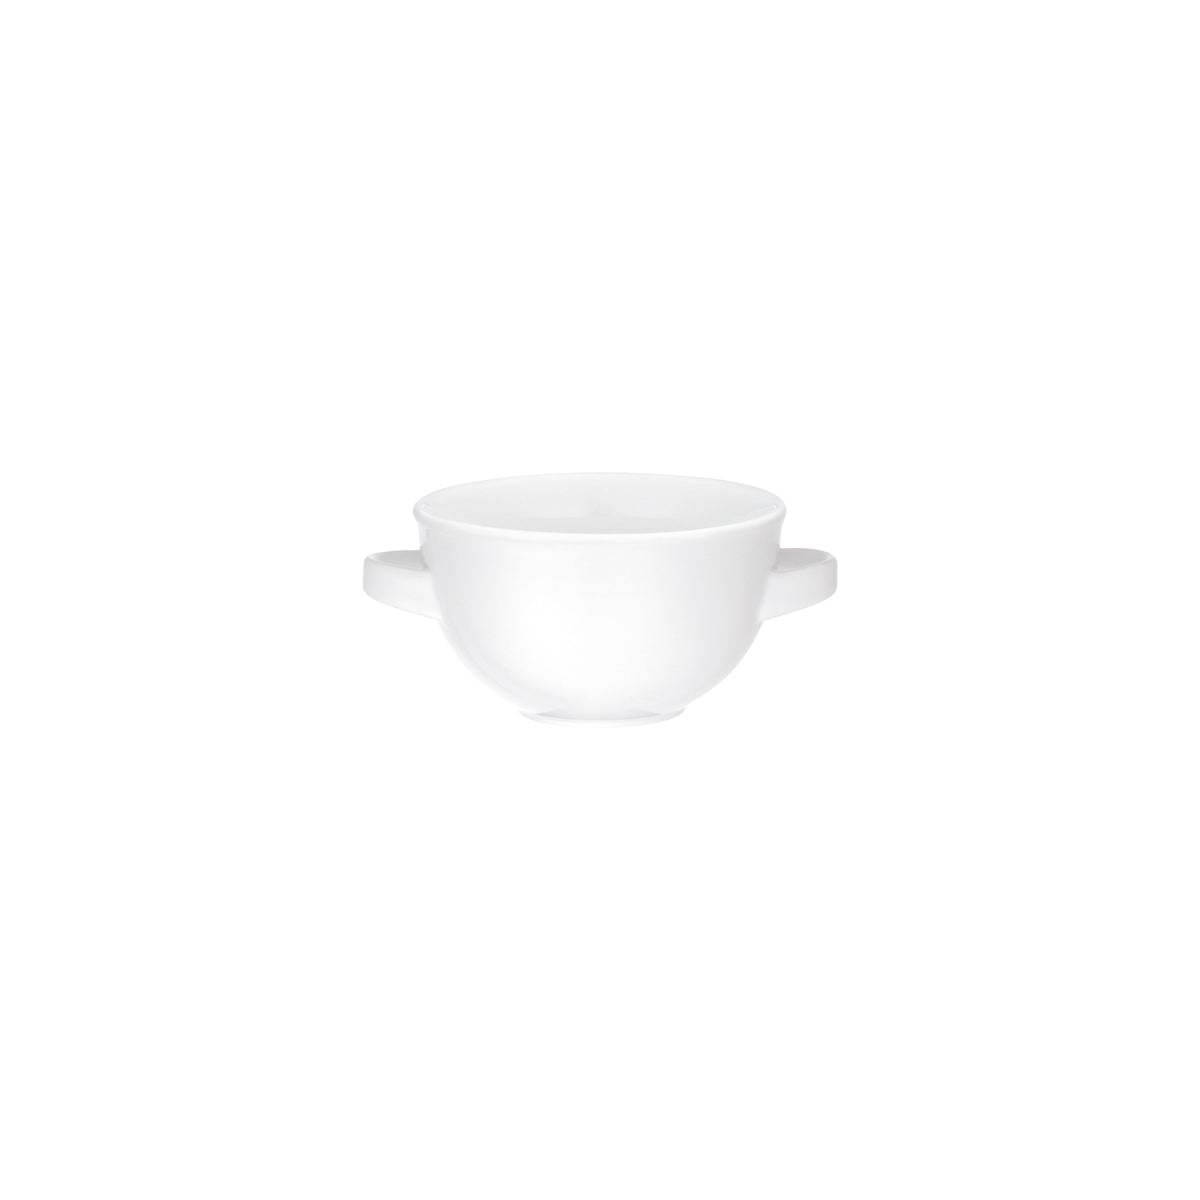 VB16-2016-2510 Villeroy And Boch Villeroy And Boch Corpo White Soup Cup 270ml Tomkin Australia Hospitality Supplies